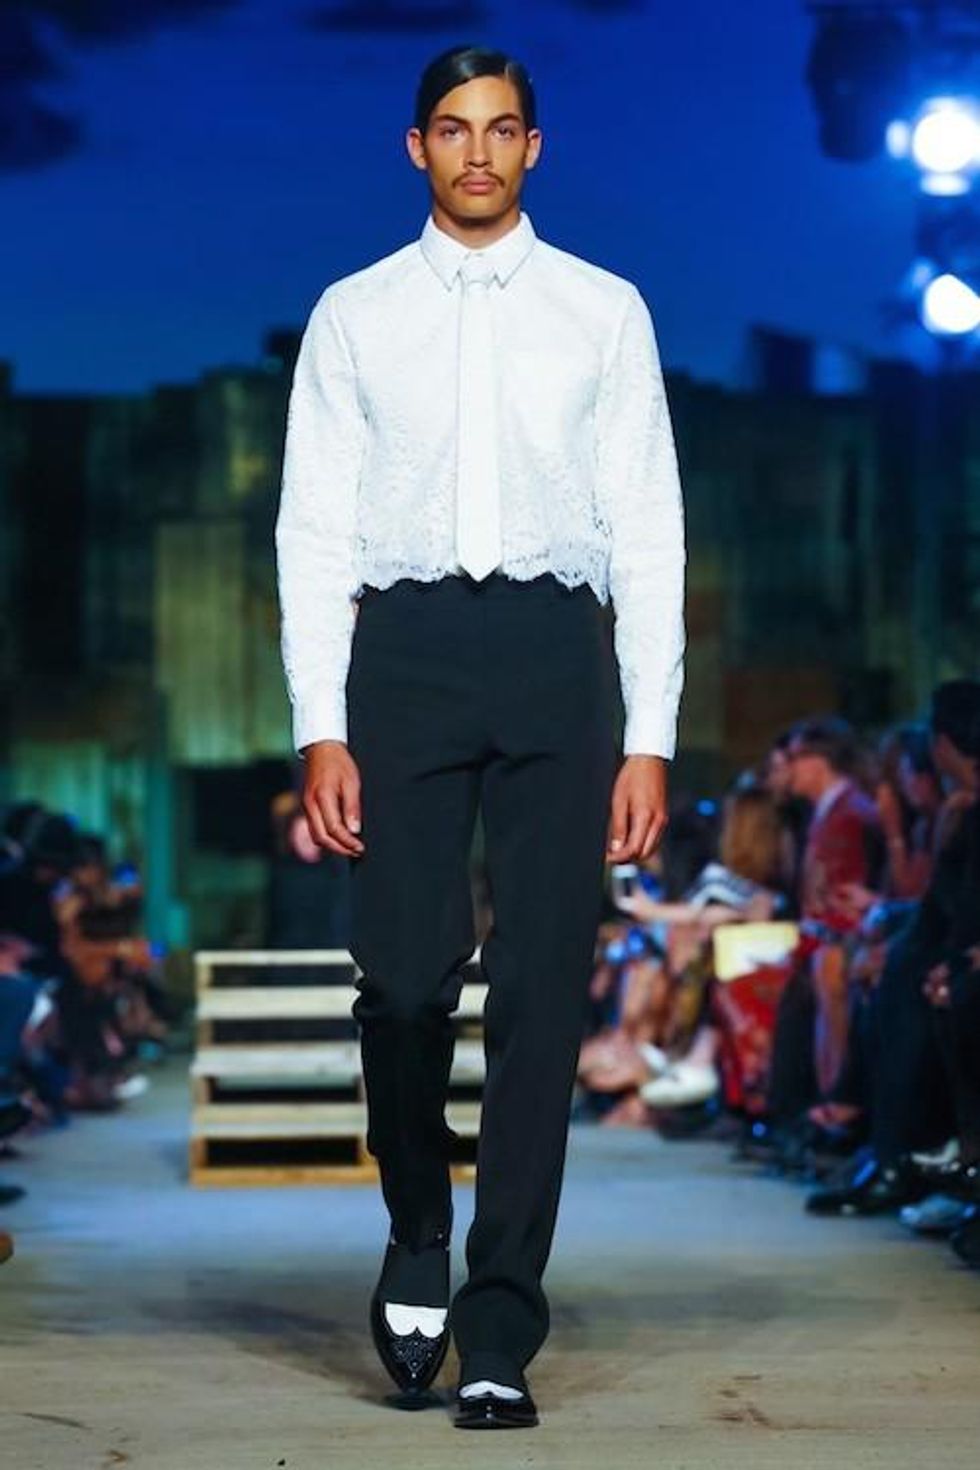 NYFW: The Men's Looks at Givenchy